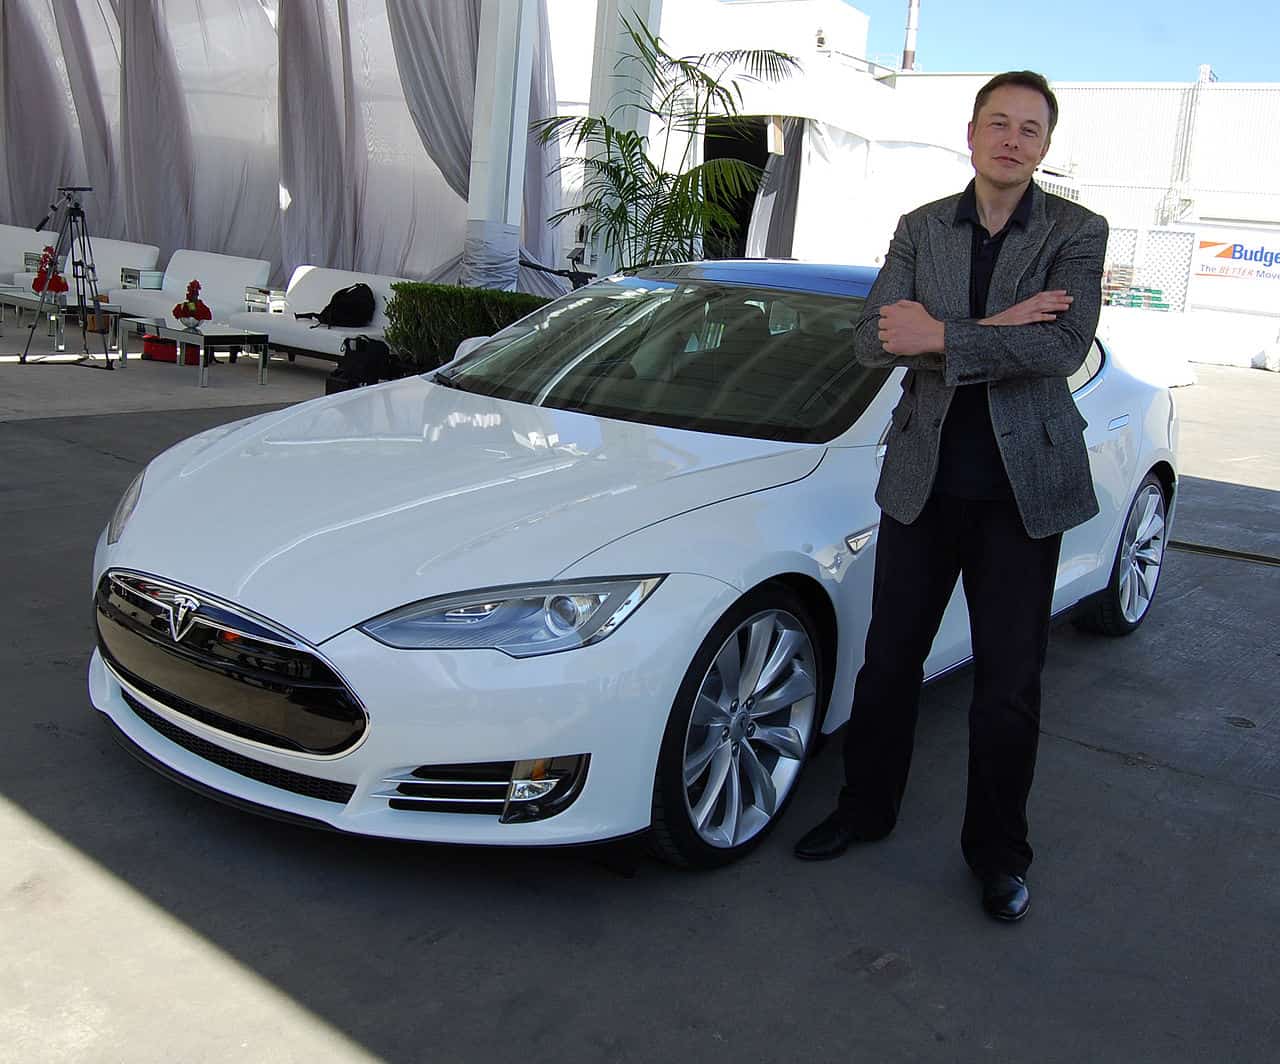 Elon Musk, Tesla Factory, Fremont (CA, USA) in 2011. Photoy by Maurizio Pesce